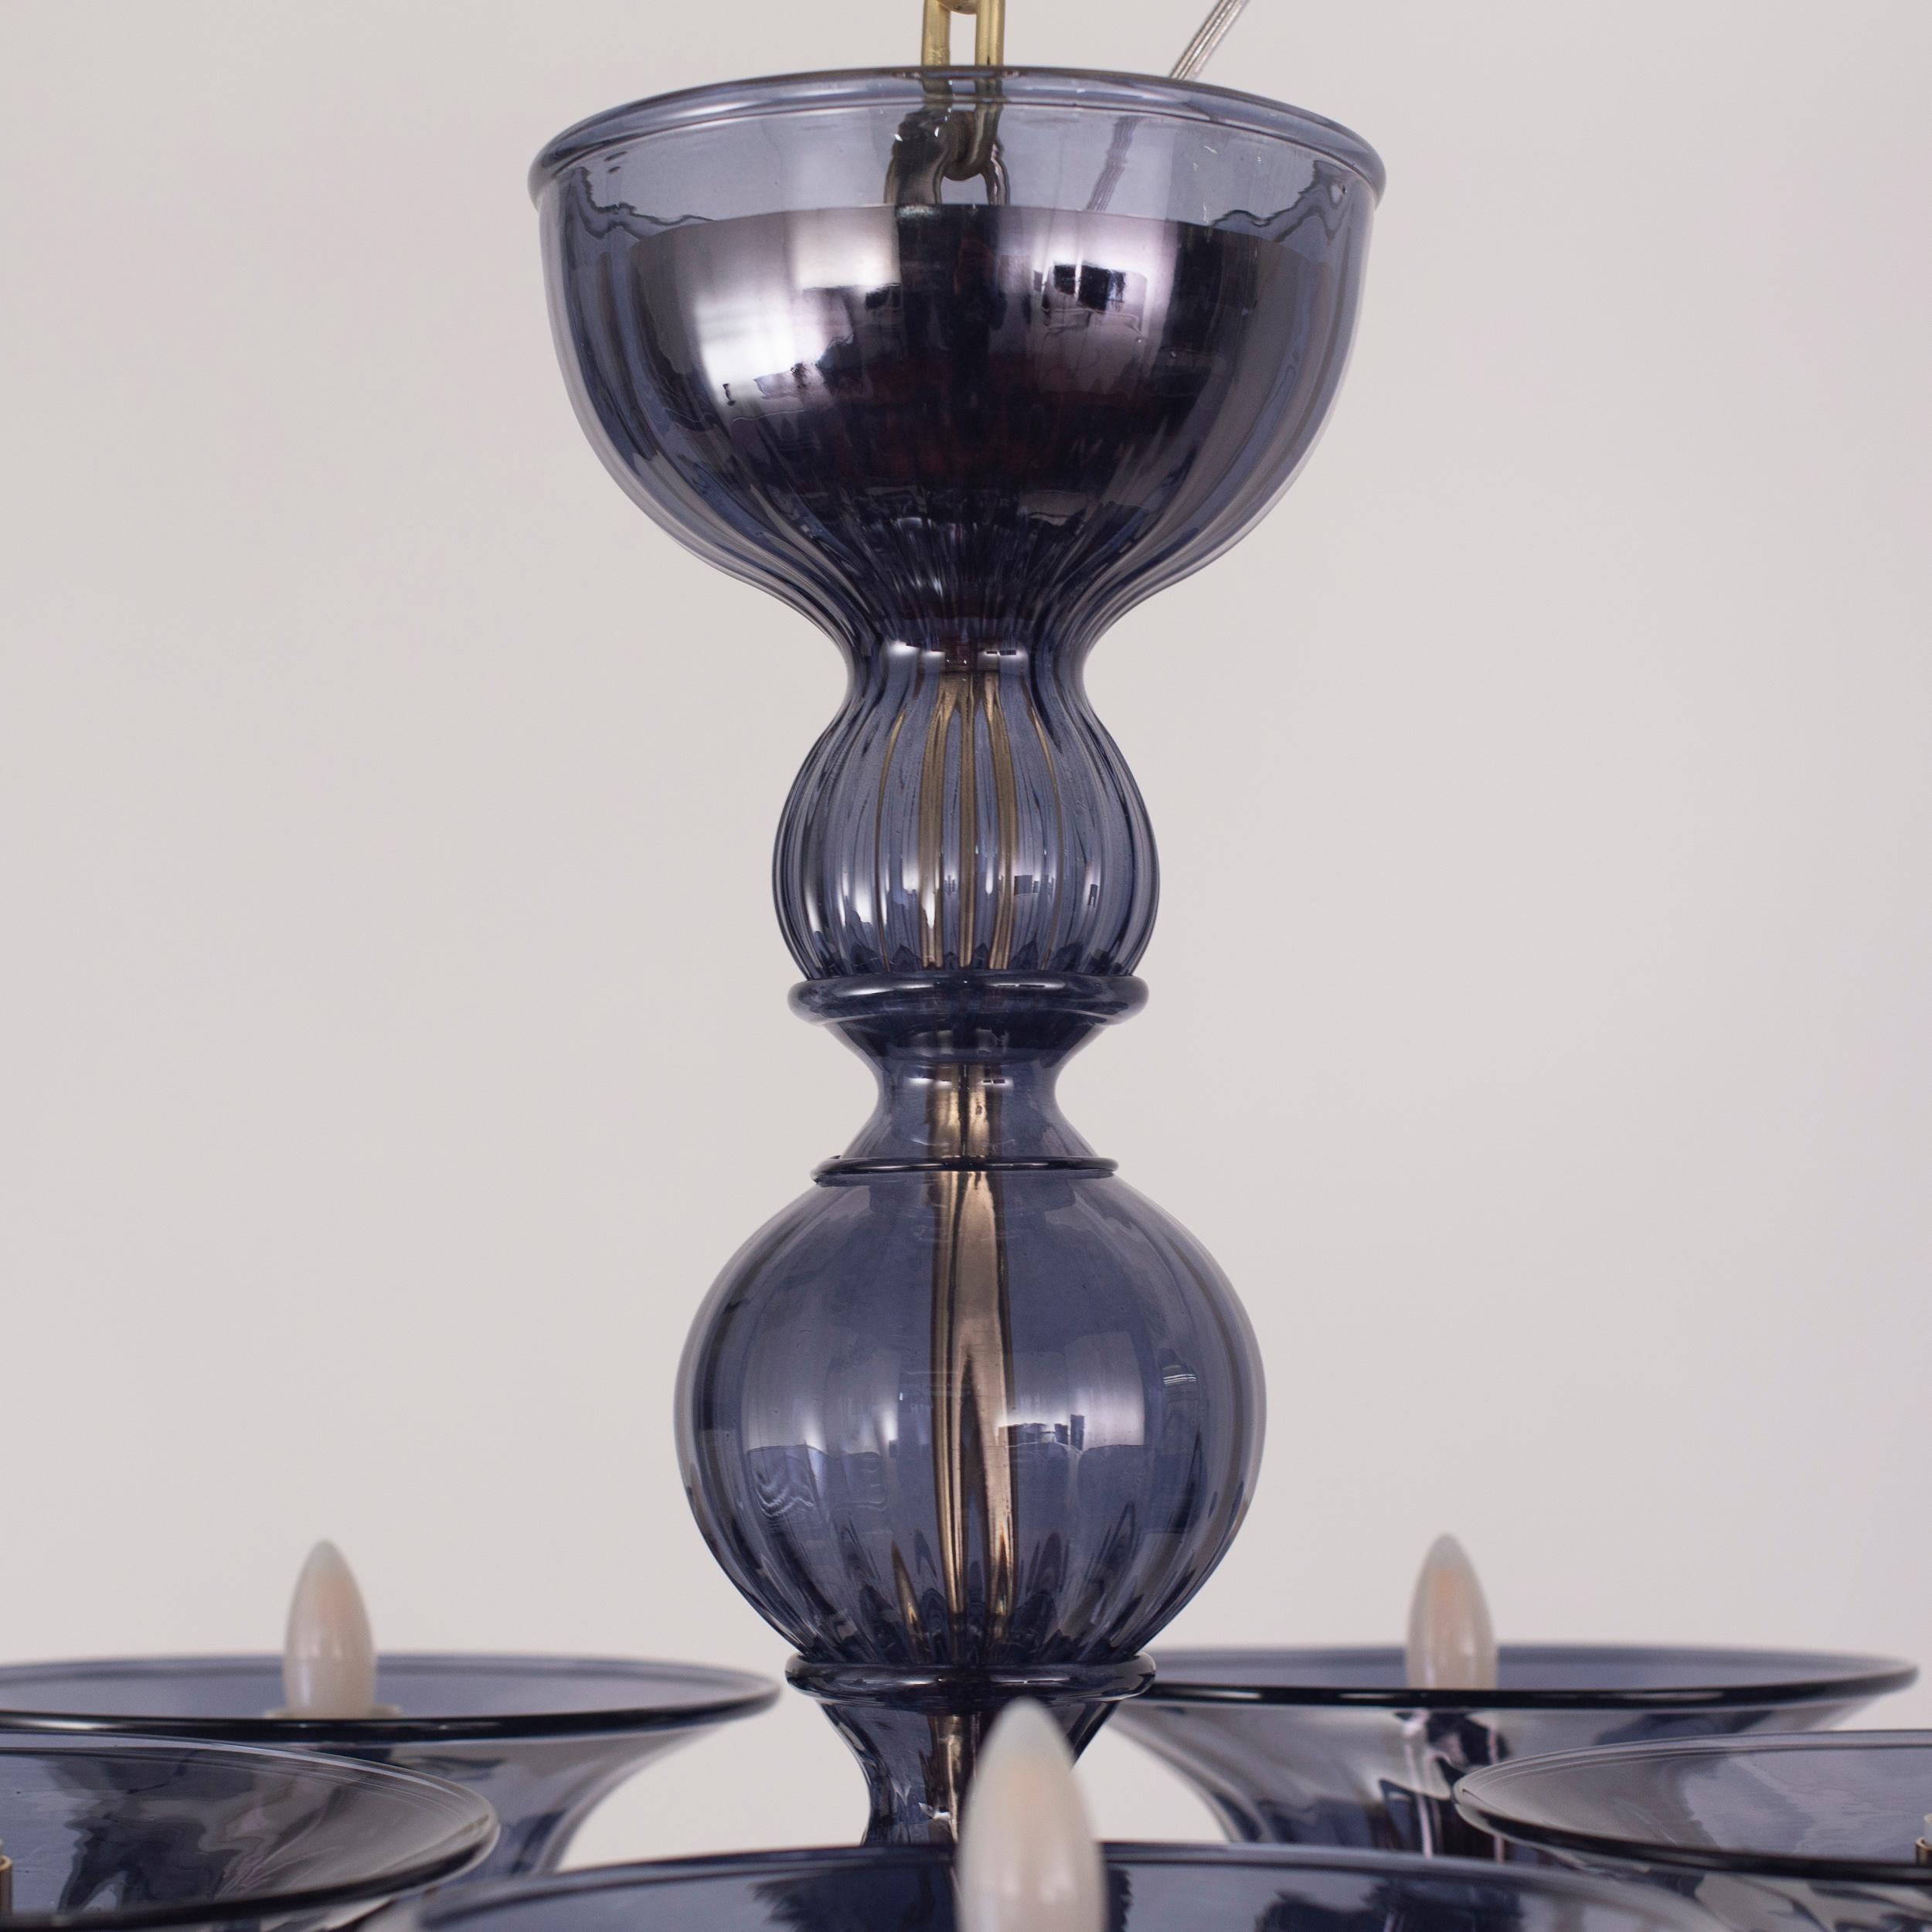 15 Arms Chandelier Slate Blue Artistic Murano Glass Simplicissimus by Multiforme For Sale 2